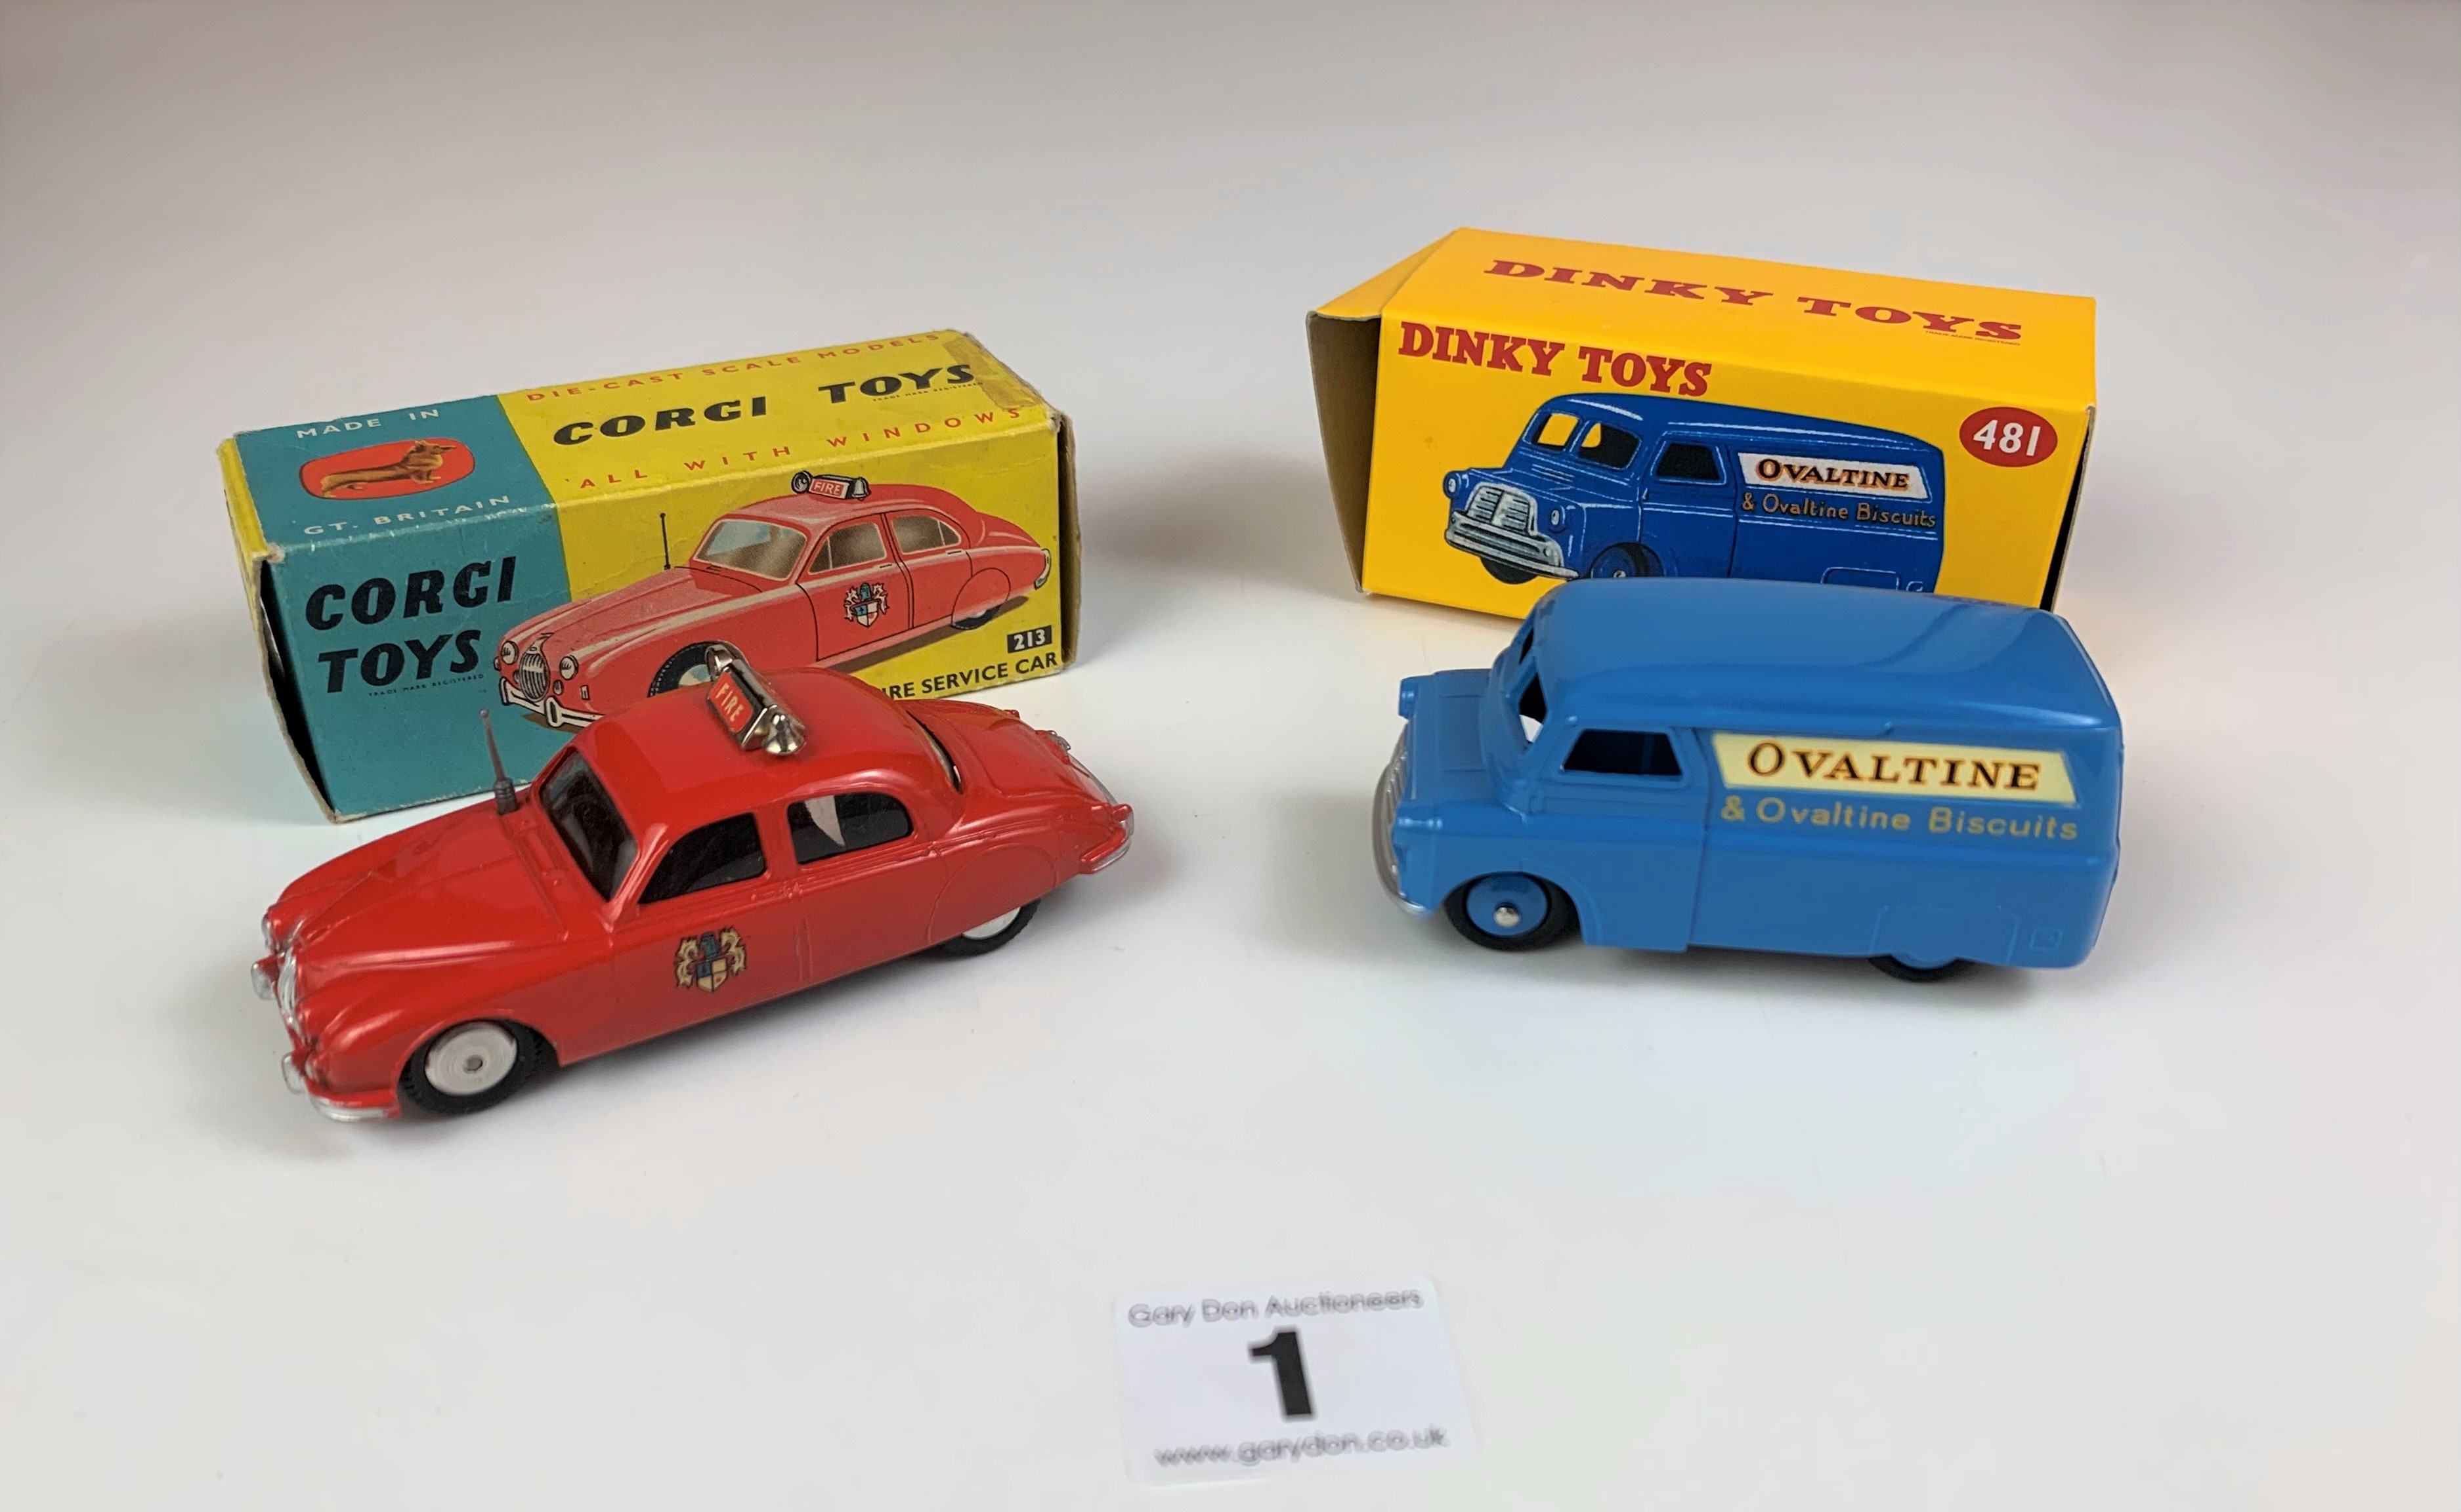 Boxed Dinky Toys 481 Bedford 10 CWT Van ‘Ovaltine’ and boxed Corgi Toys 213 2.4 Jaguar Fire